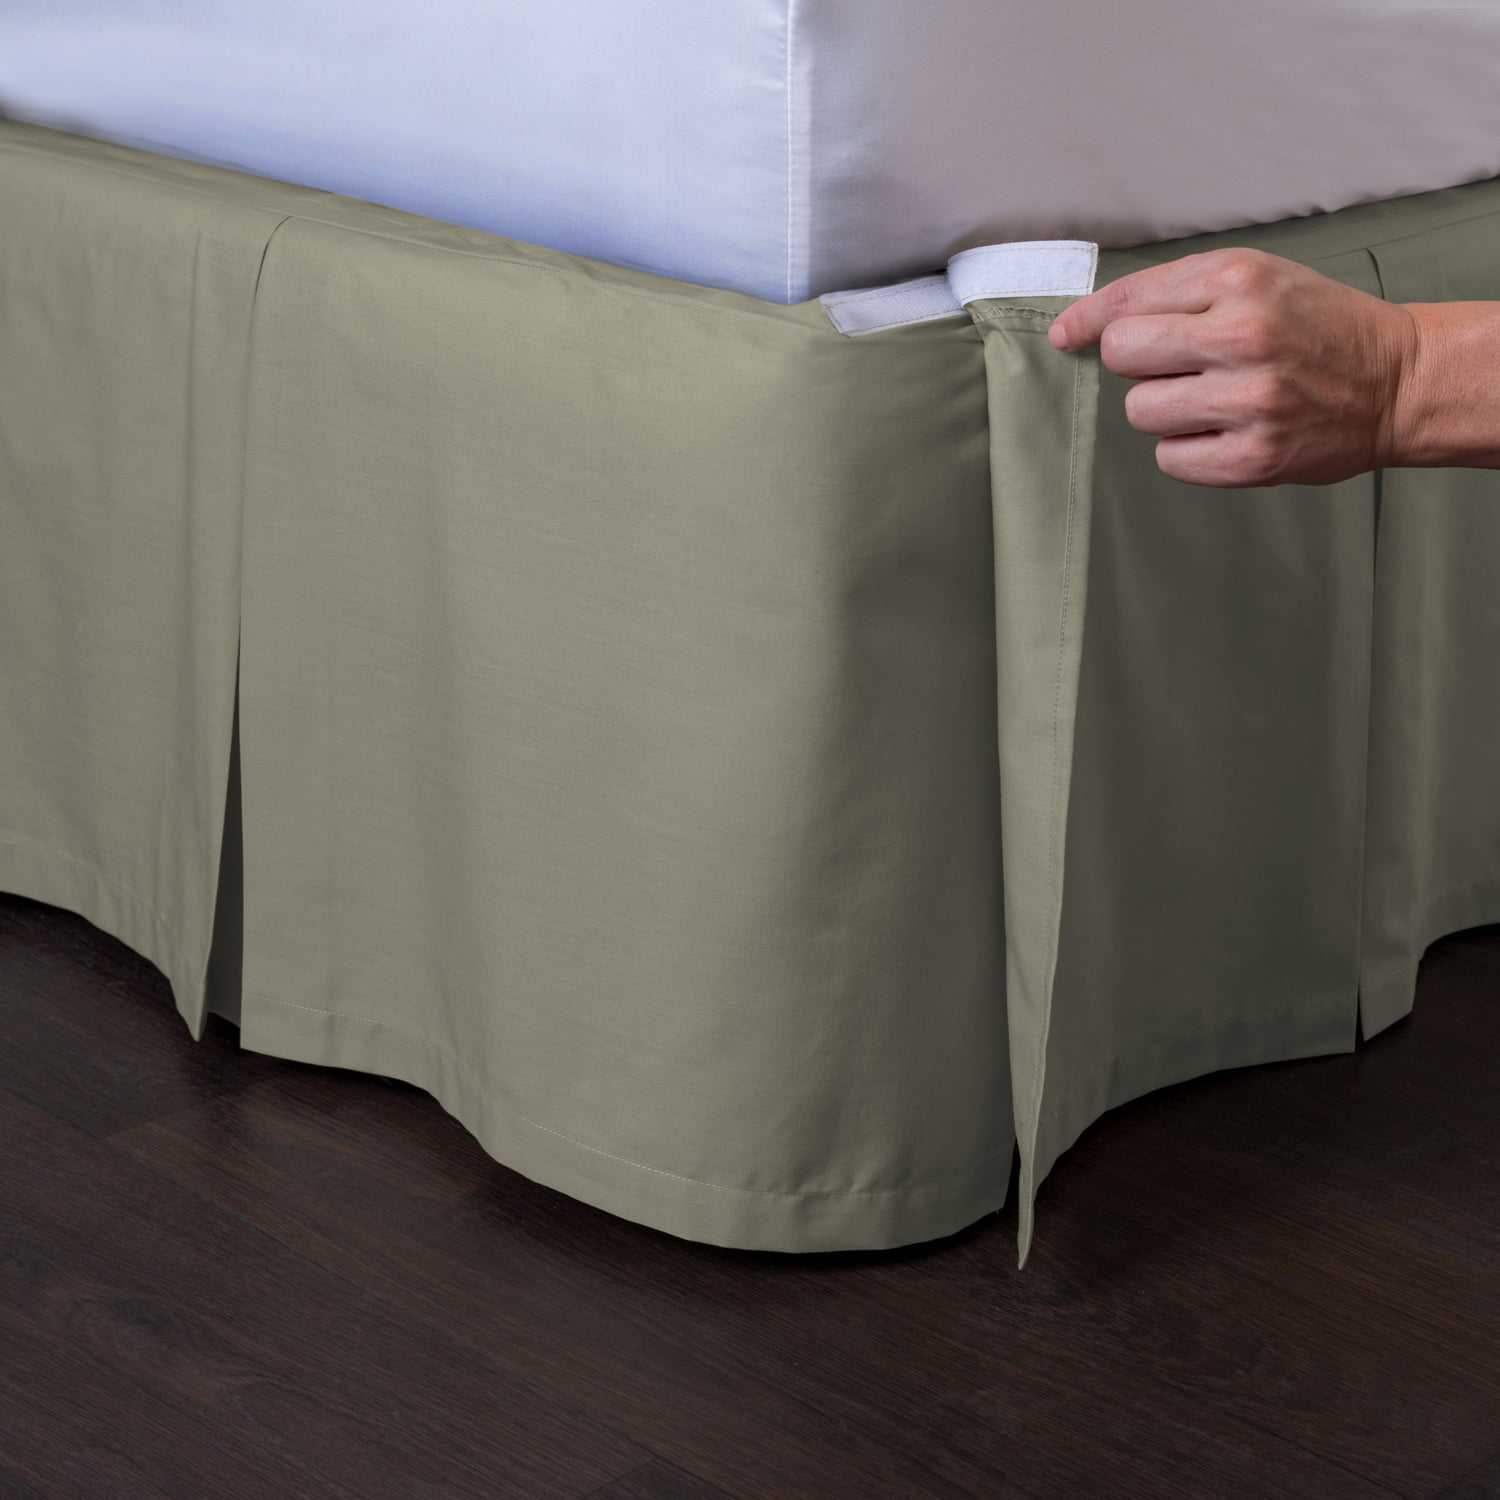 Pleated GEBIN Bed Base Skirt Fits Under The Mattress & Down To The Floor,15 Inch Drop Beige,Double Bed Skirt Easy Care Soft Brushed Microfibre Fabric